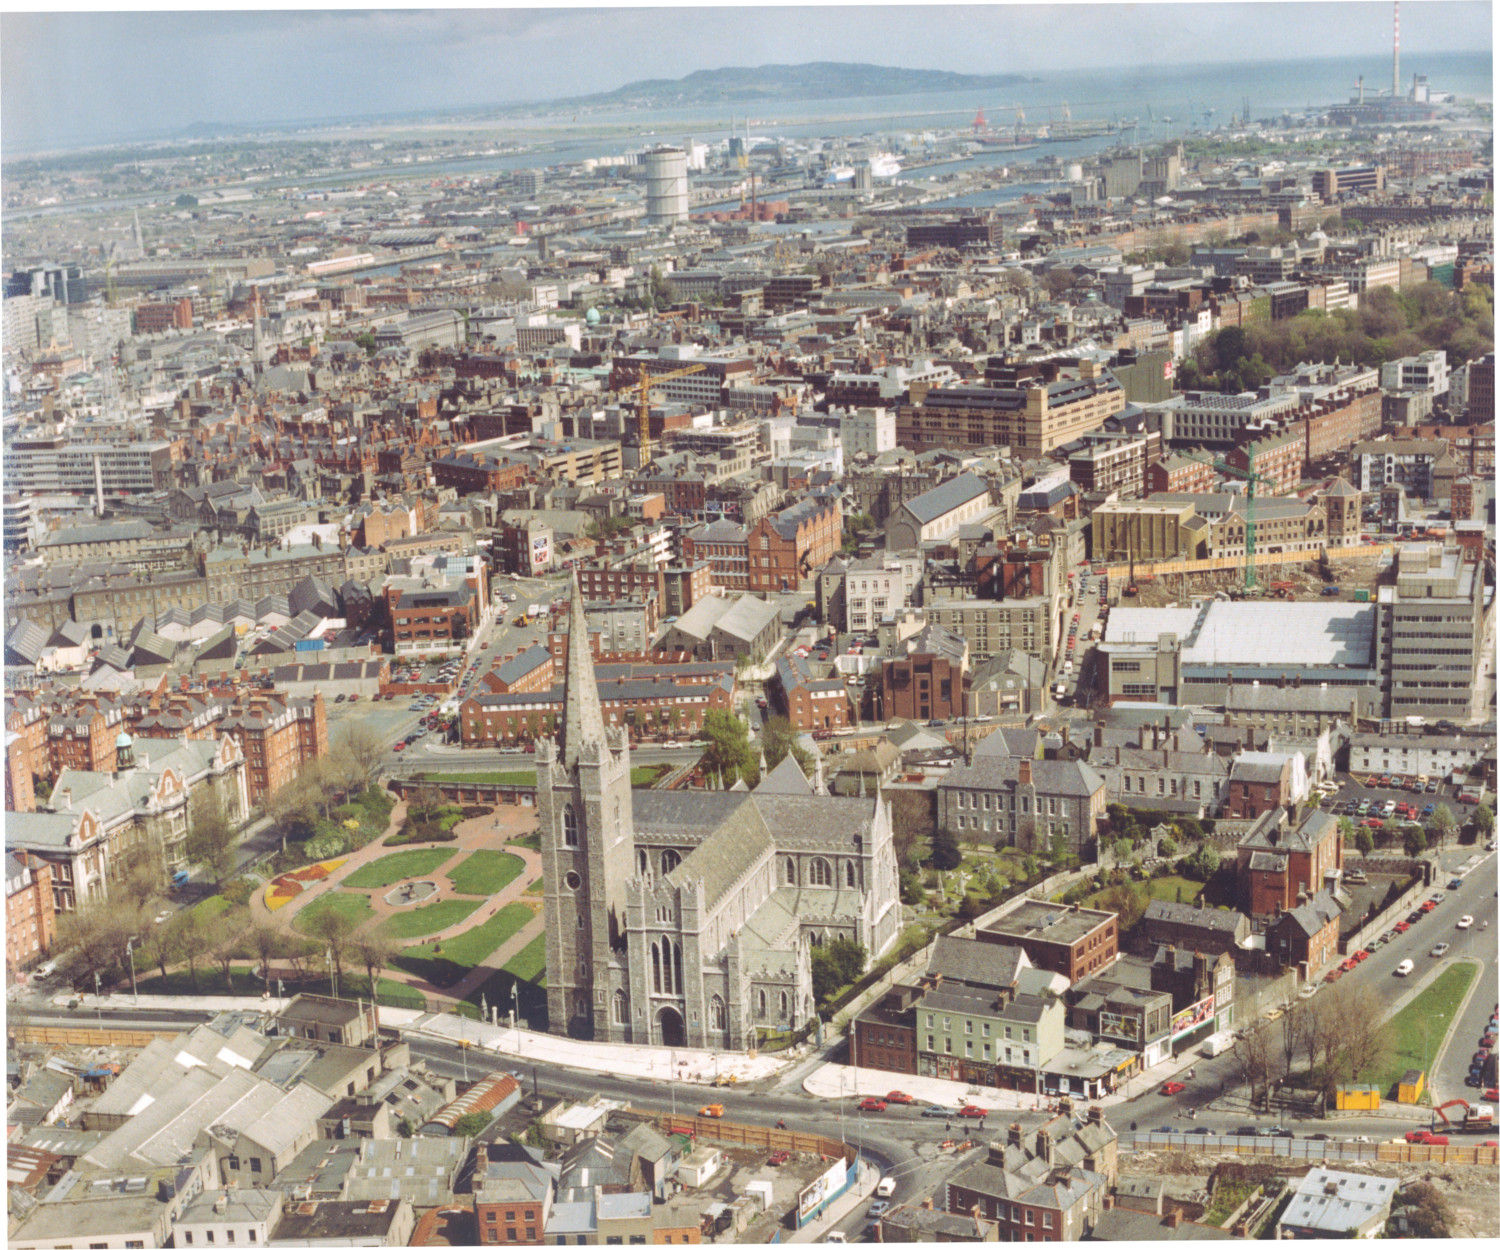 Aerial view of St Patrick's Cathedral - RCB Library C2.6.2